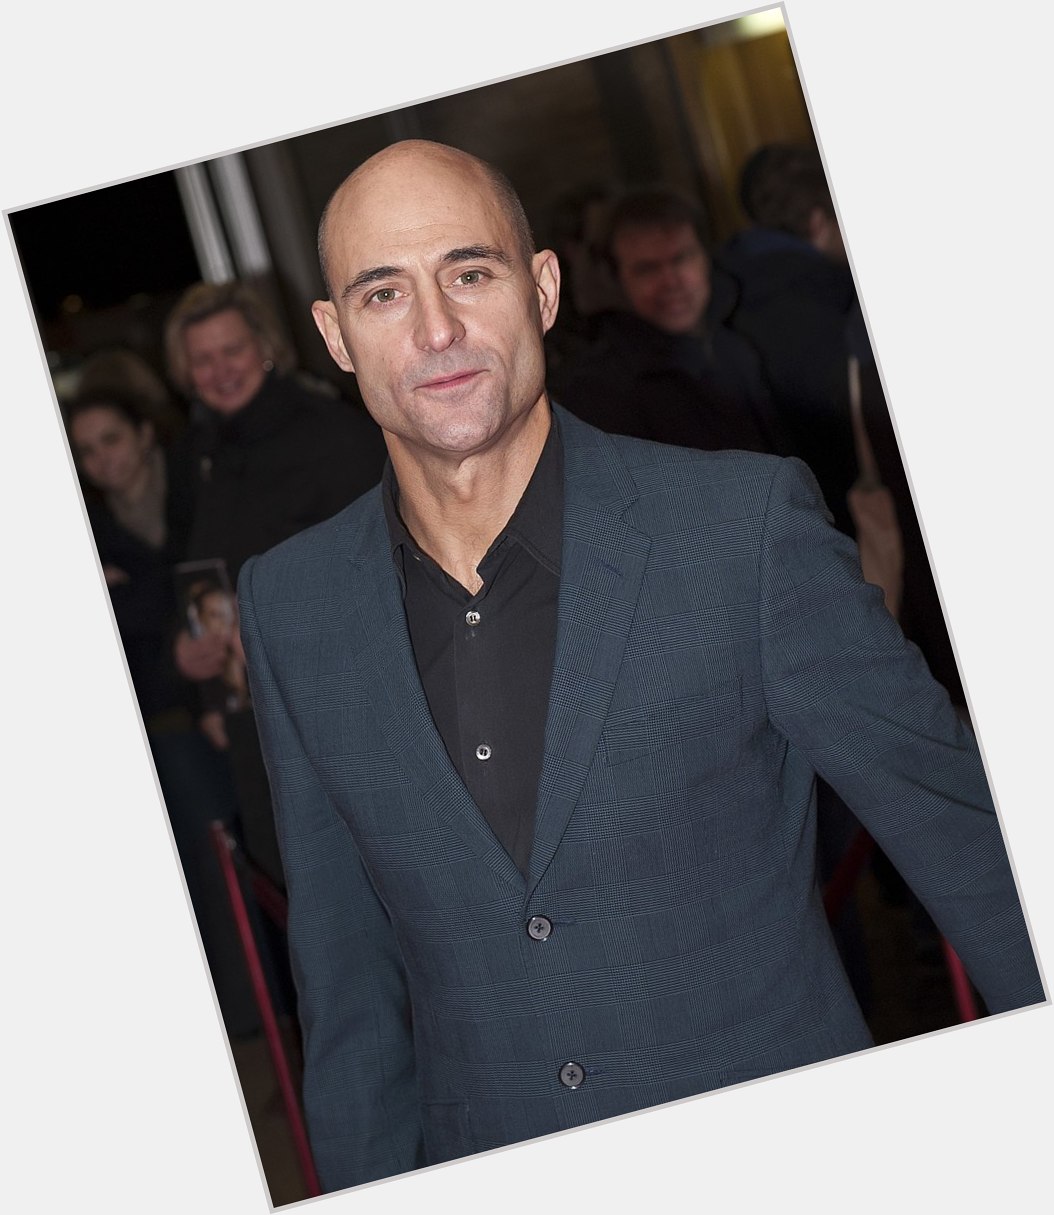 British TV and film birthdays for 5 August

Happy birthday to Mark Strong
(born 5 August 1963)
English actor. 